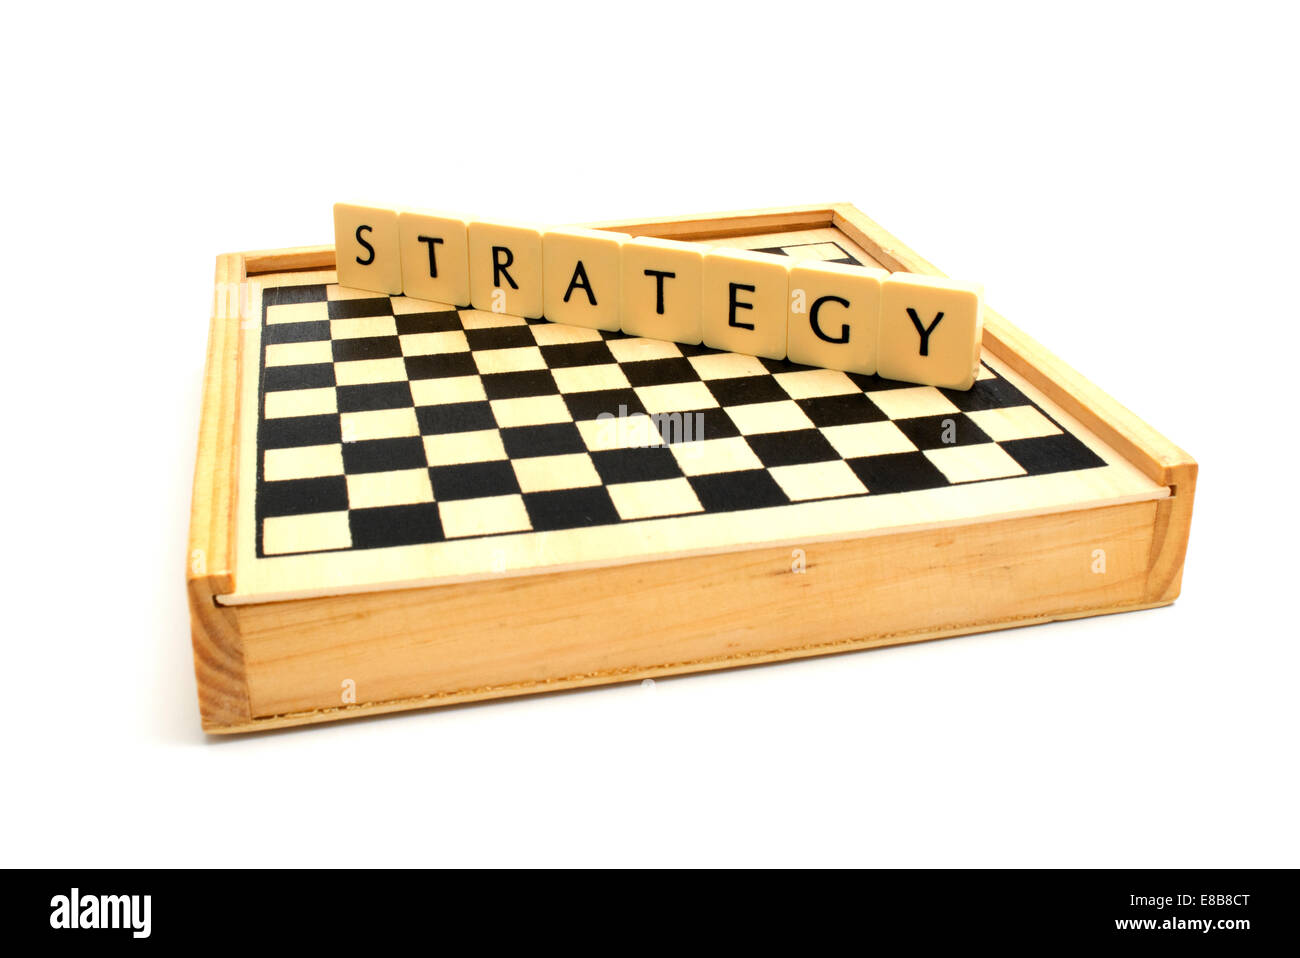 Chess board and strategy word together. Stock Photo